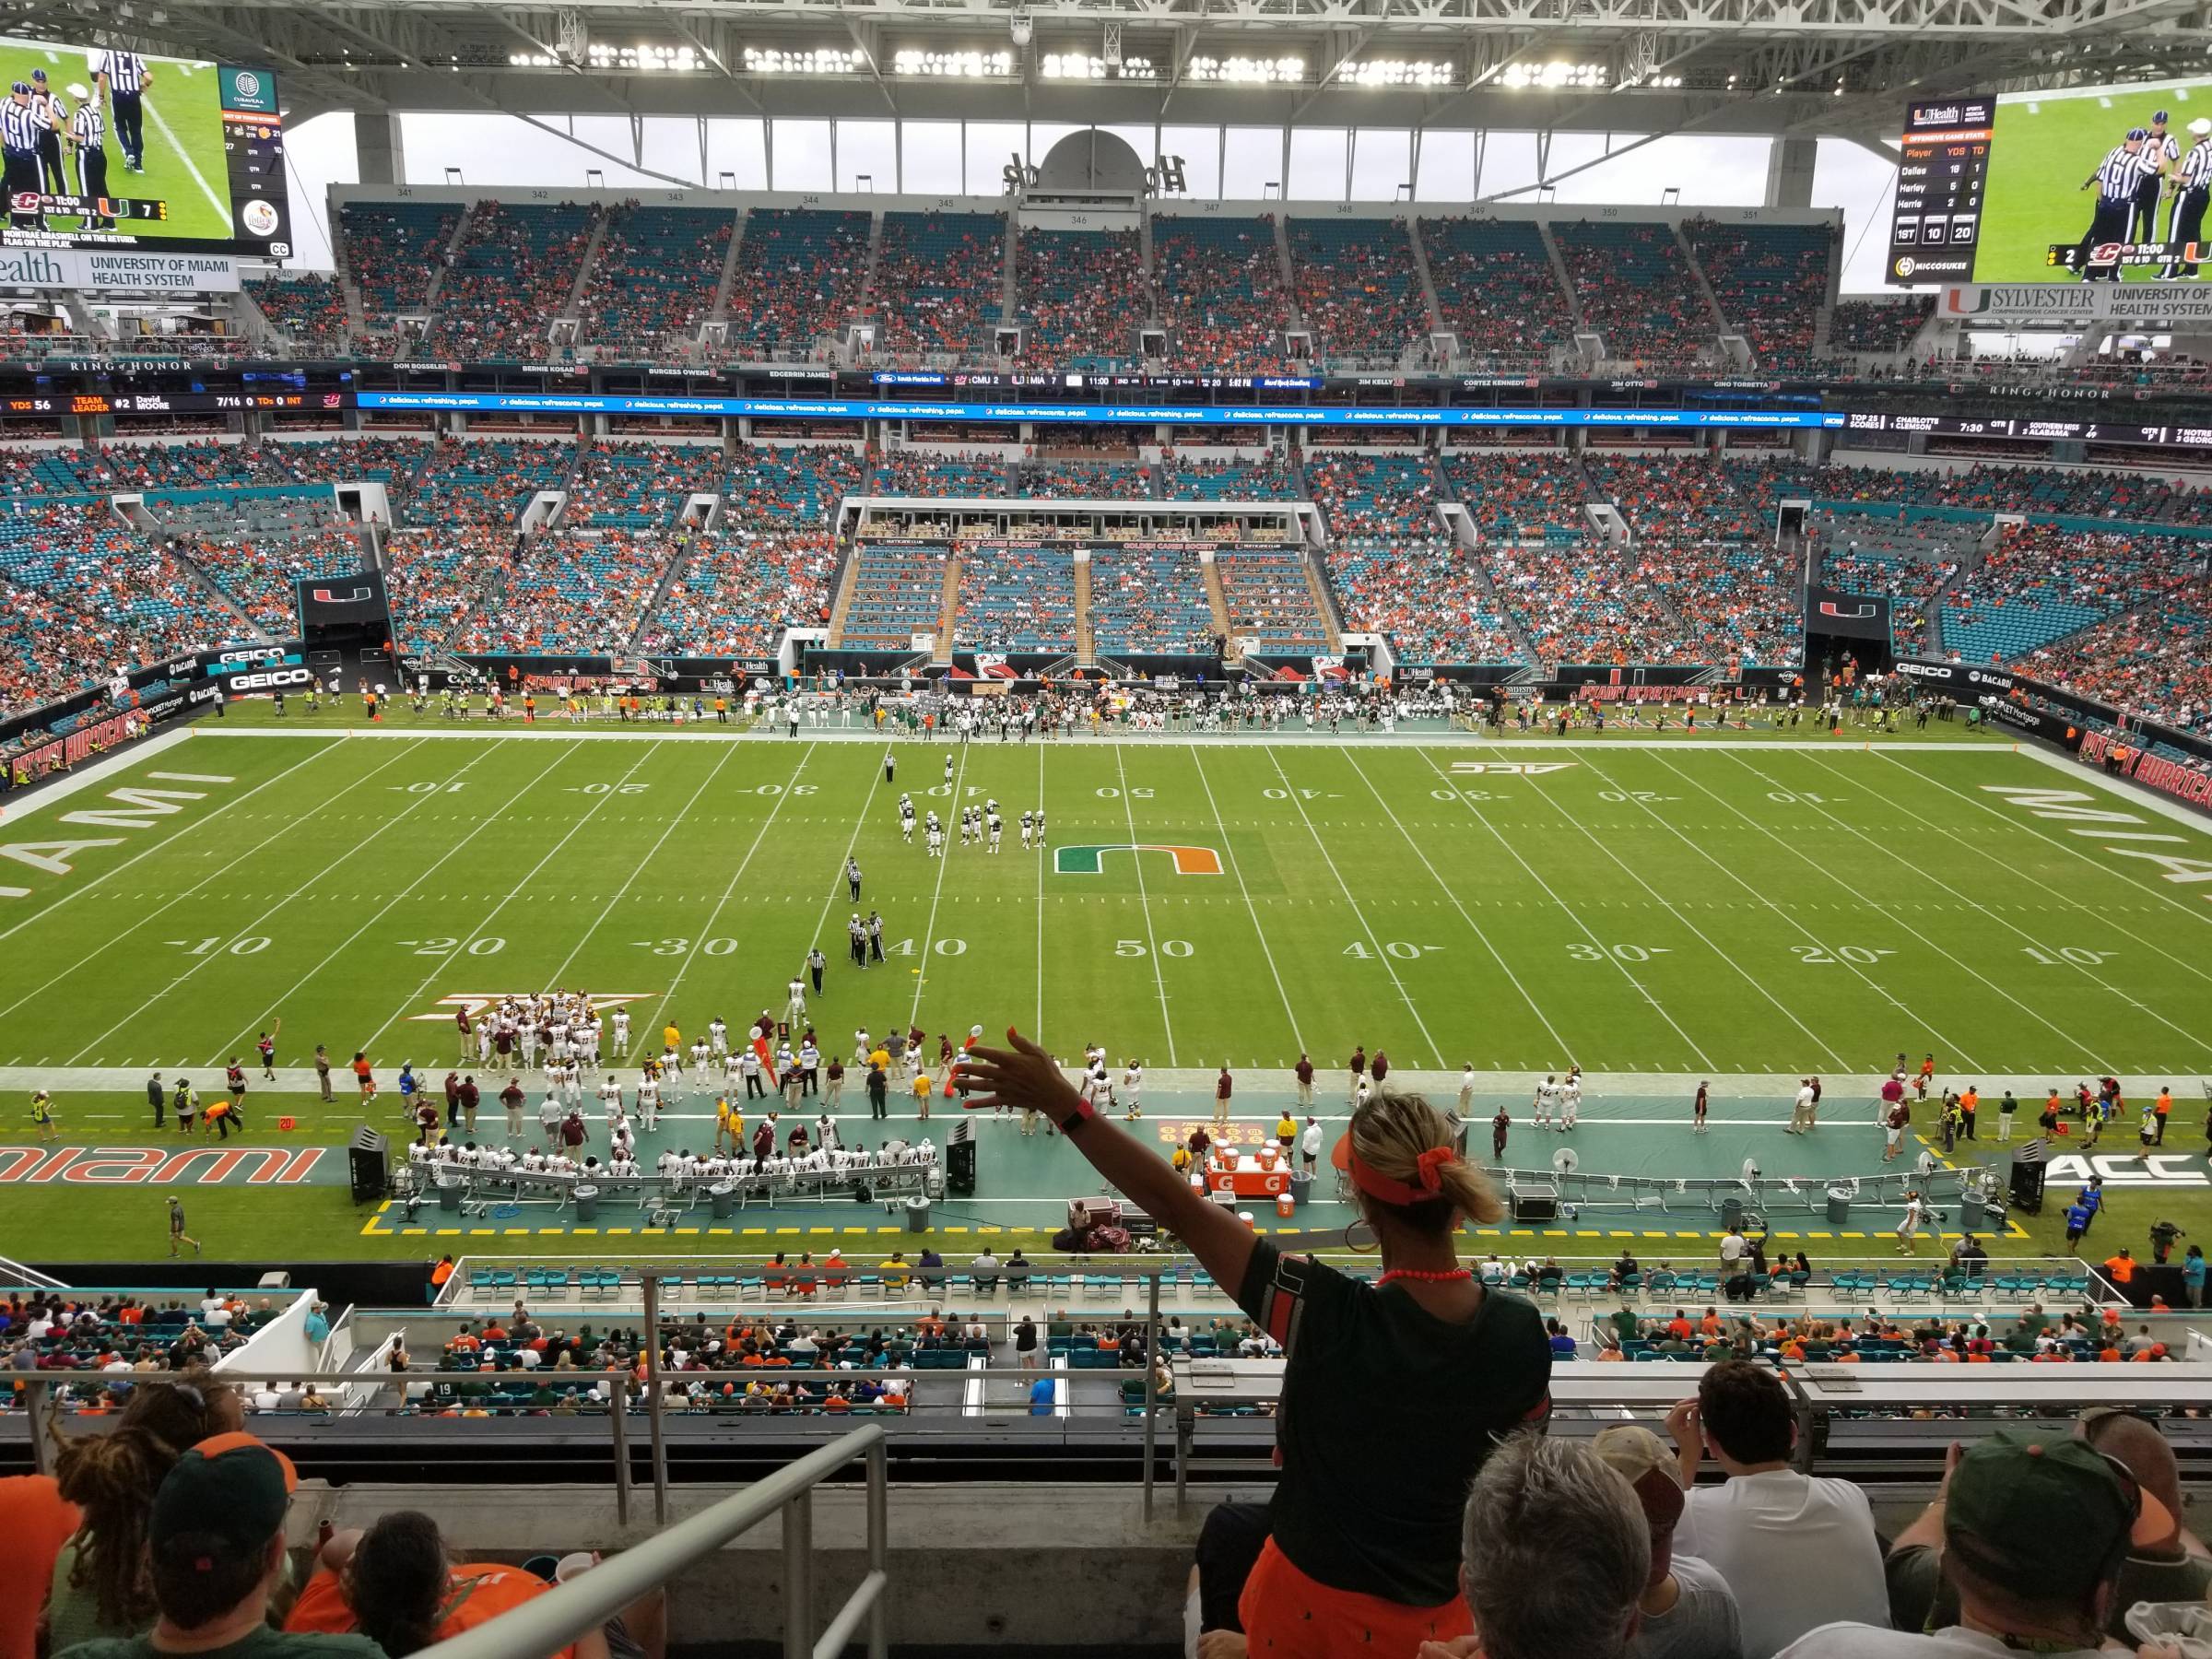 Seat view of section 318